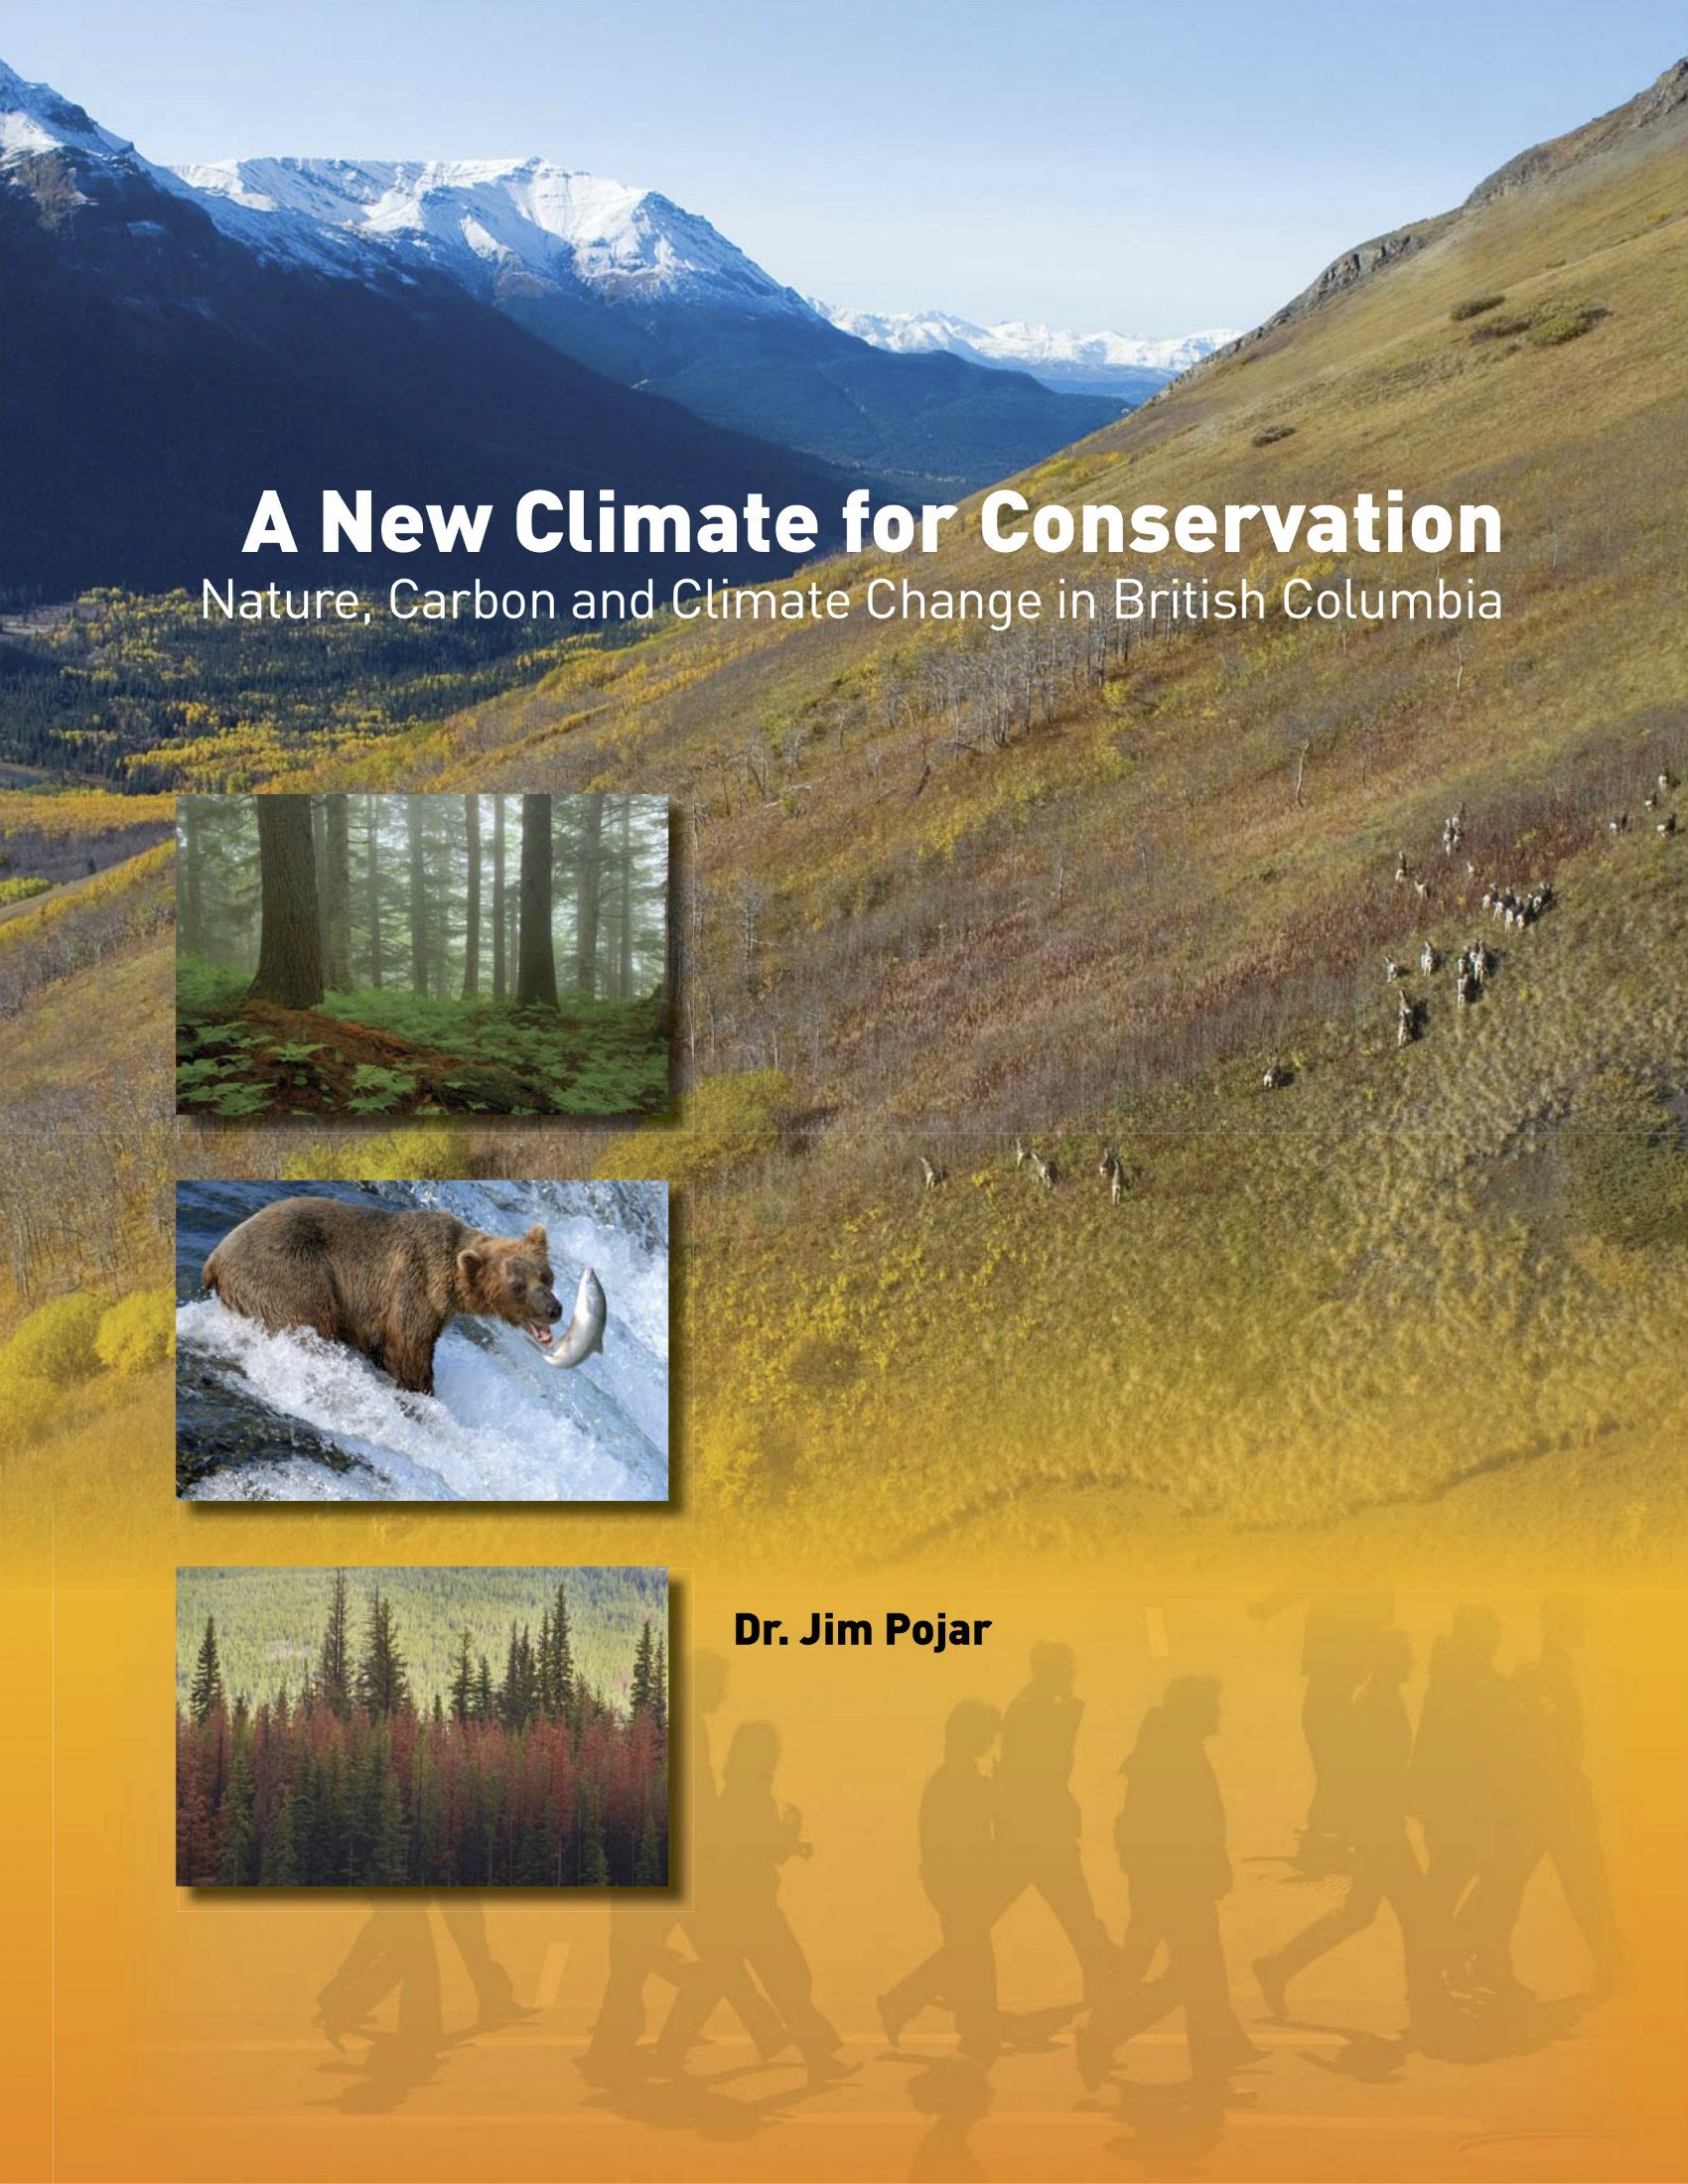 A New Climate for Conservation: Nature, Carbon and Climate Change in British Columbia